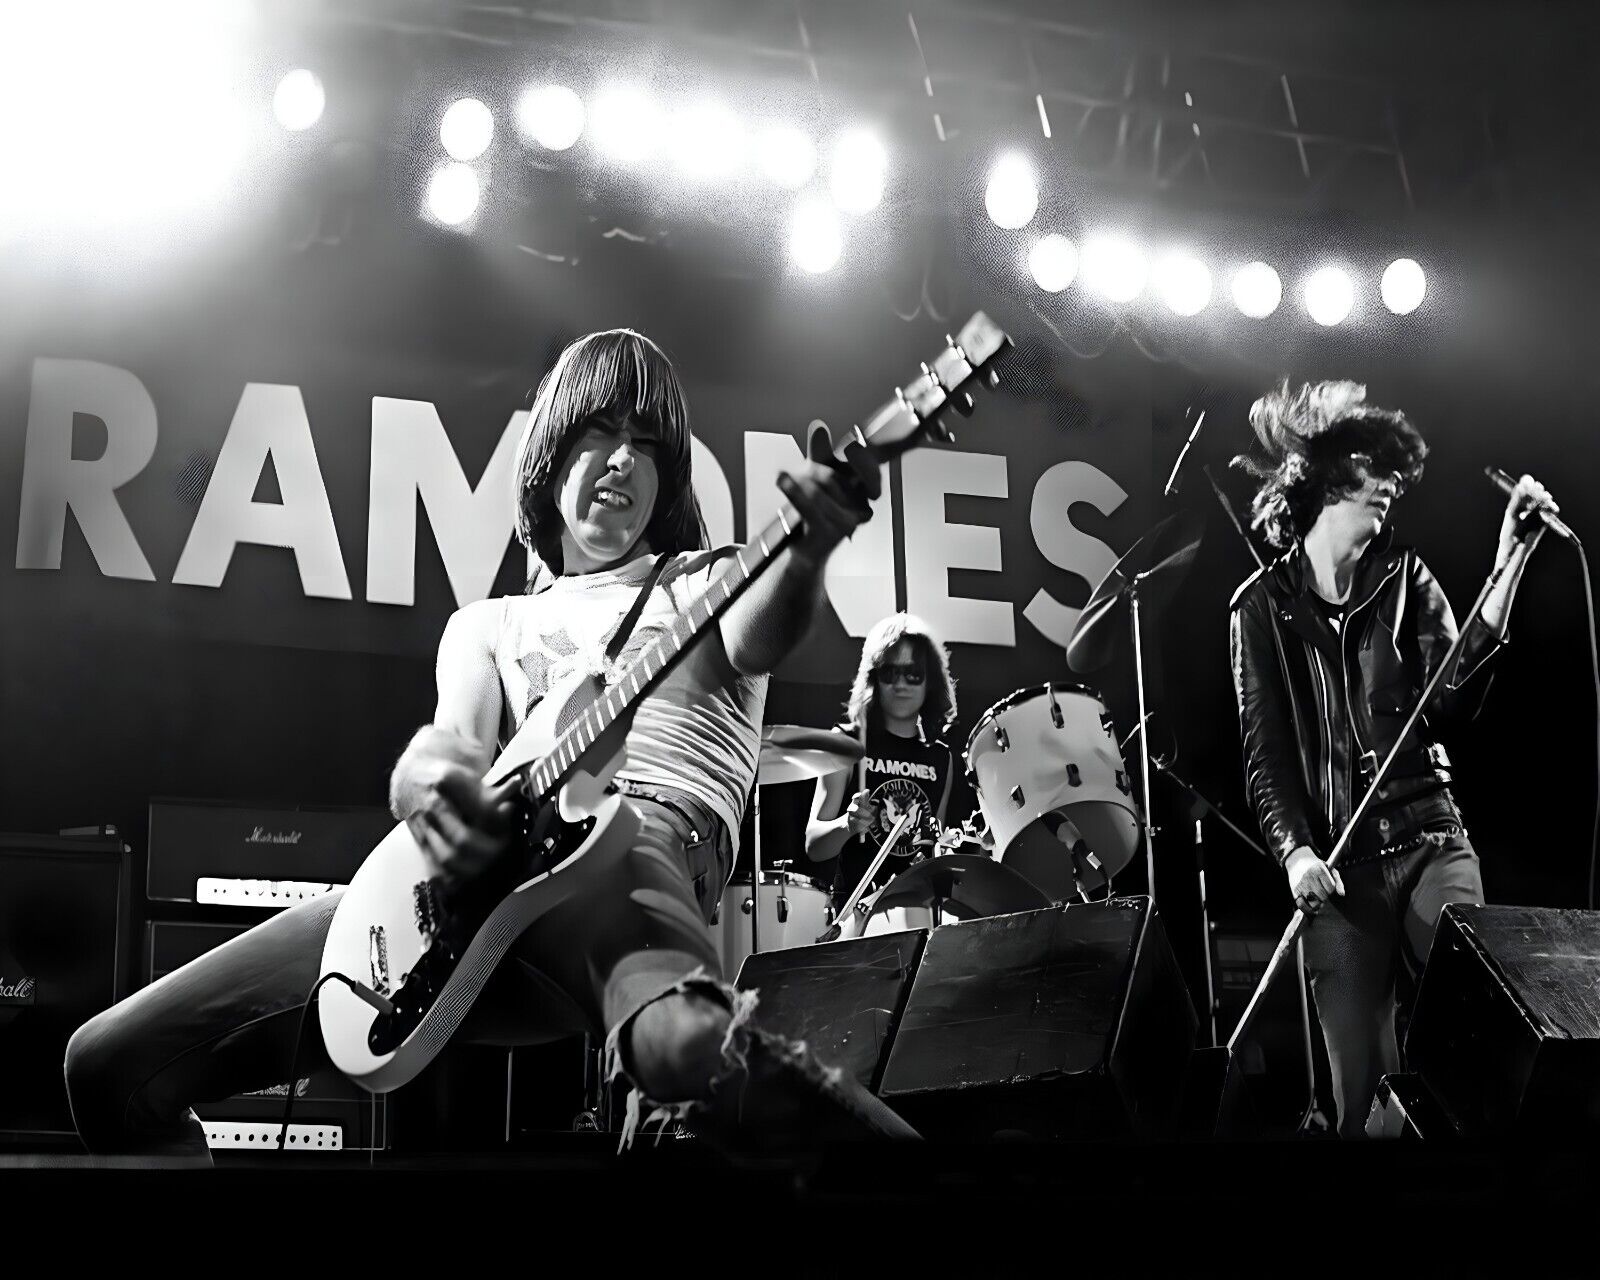 The Ramones 8 x 10 Photo Picture Photograph Art Print Musician Rock Band